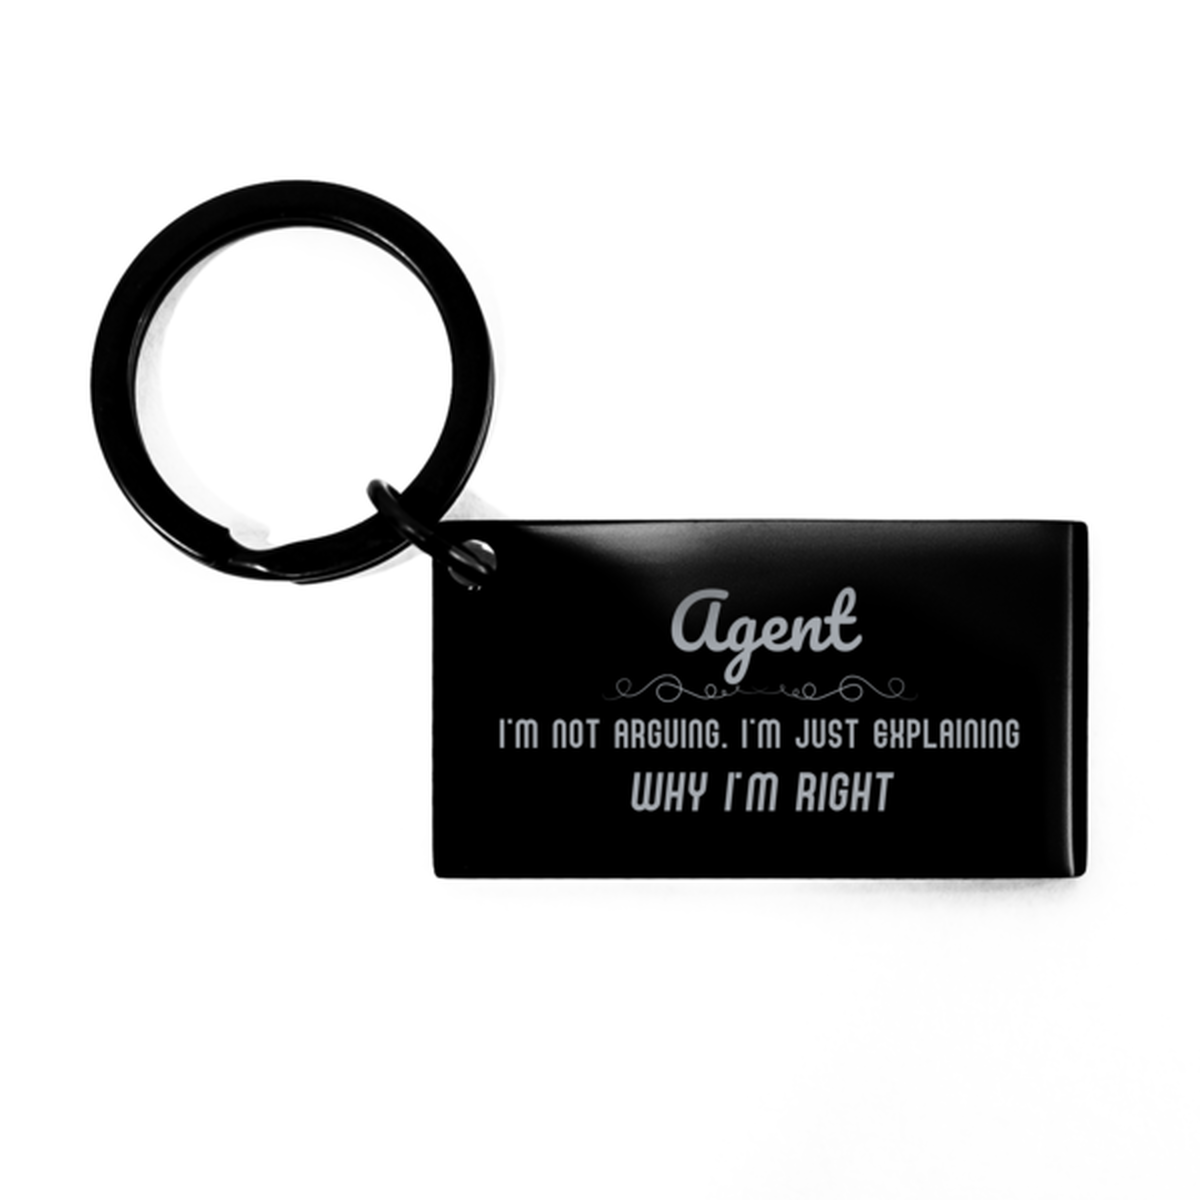 Agent I'm not Arguing. I'm Just Explaining Why I'm RIGHT Keychain, Funny Saying Quote Agent Gifts For Agent Graduation Birthday Christmas Gifts for Men Women Coworker